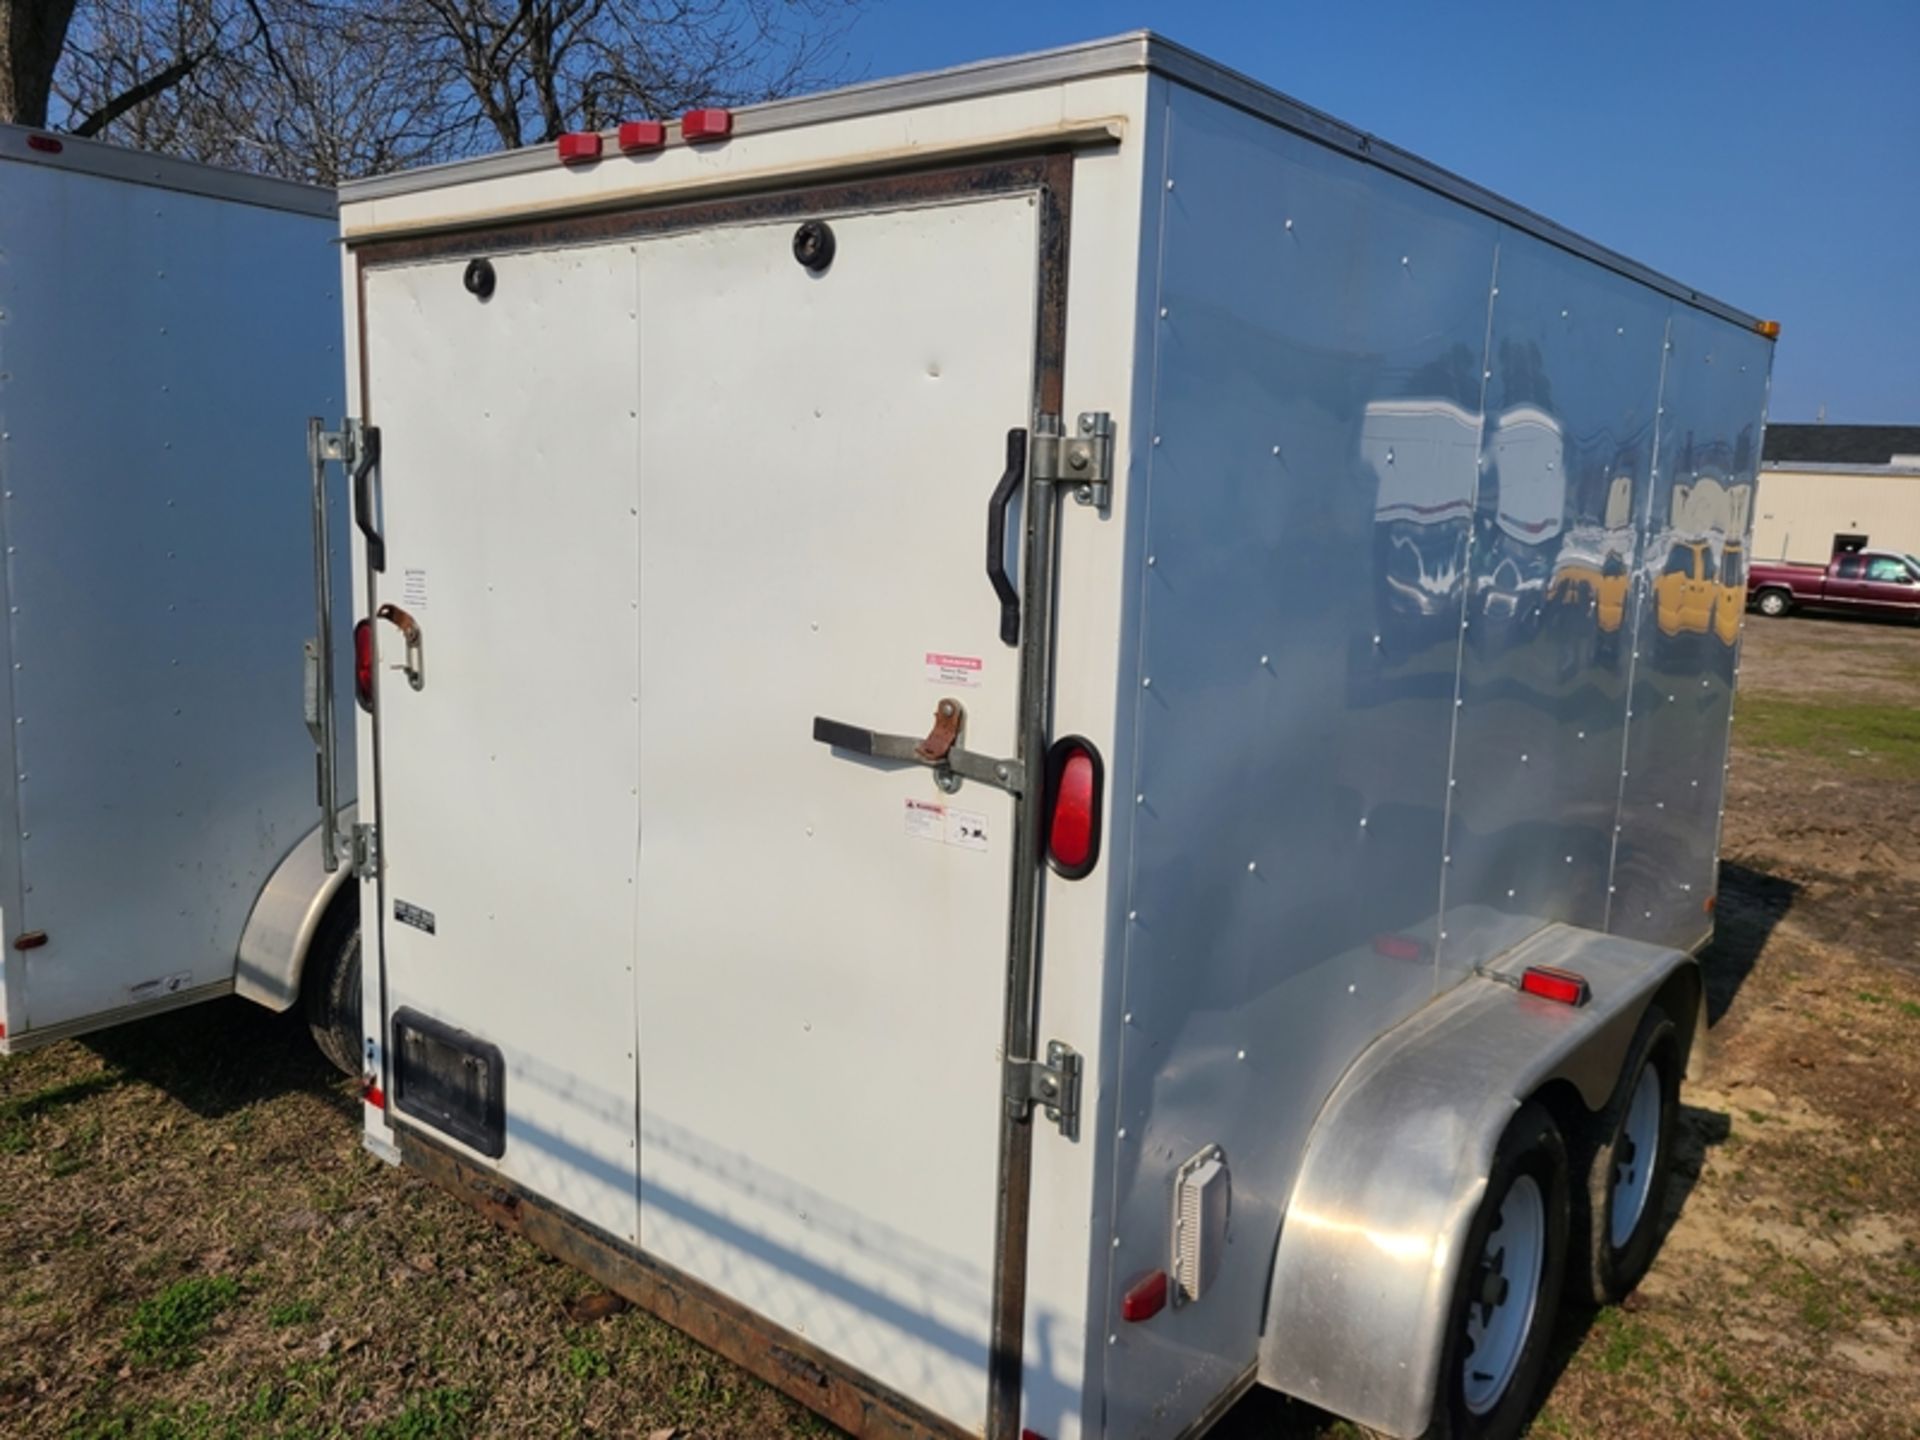 2018 COVERED WAGON 6'X12' dual-axle, V-nose, enclosed trailer, ramp door - VIN: 53FBE1220JF036770 - Image 3 of 6